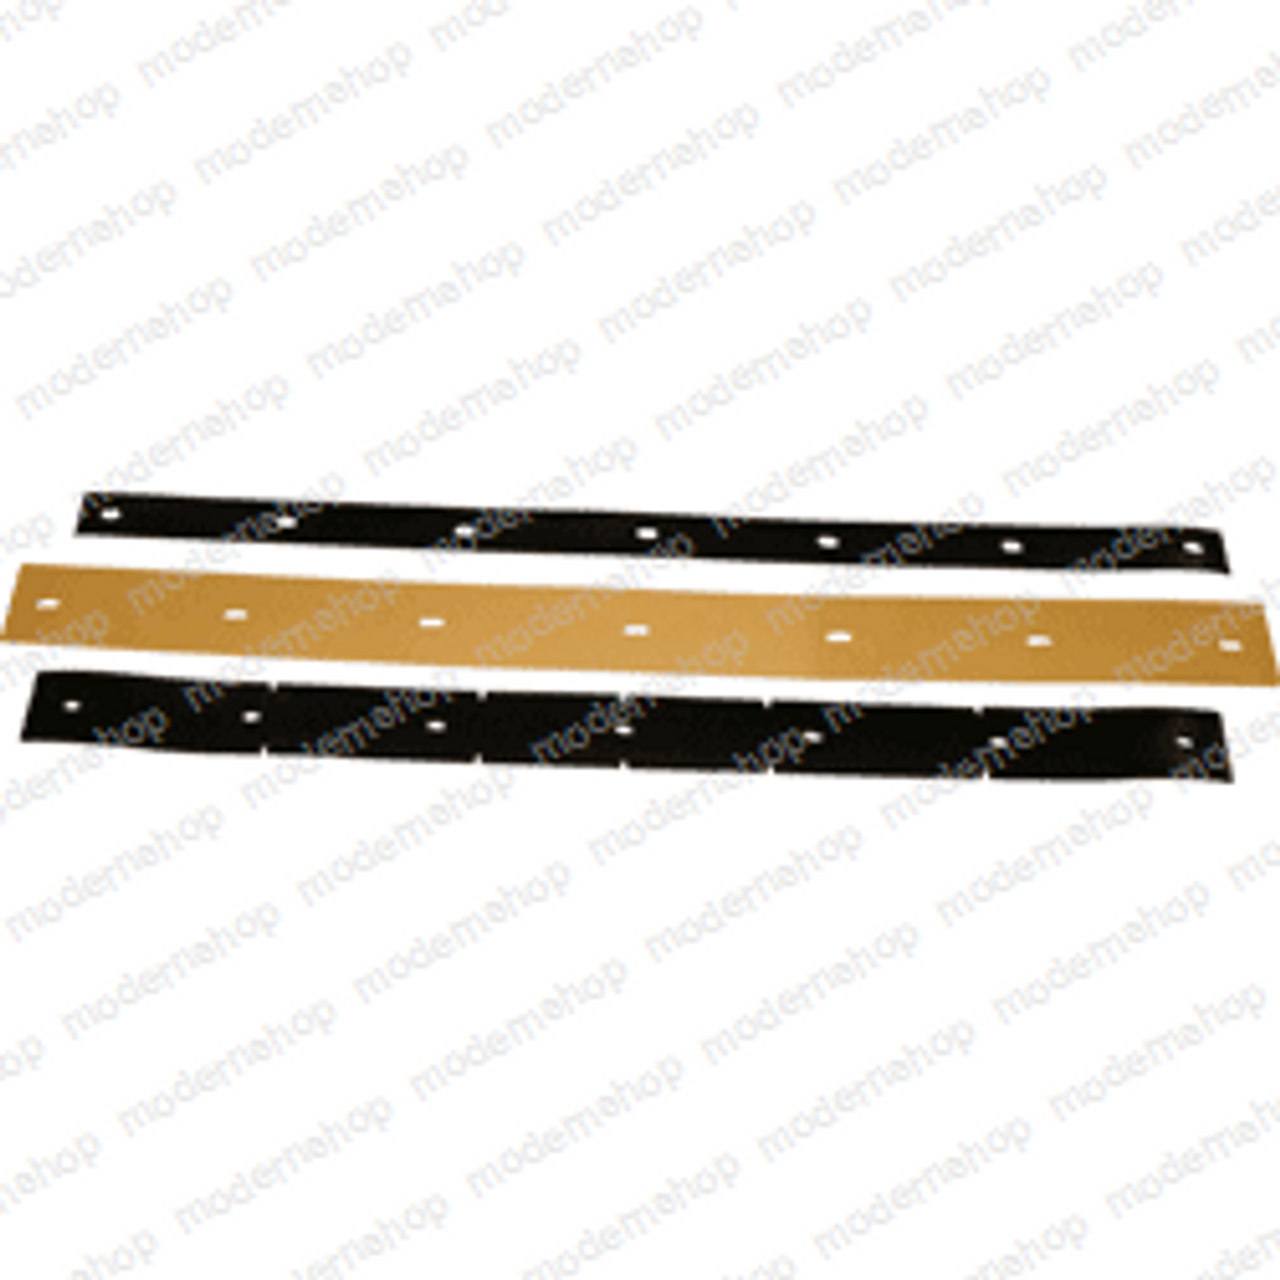 56391250: Clarke Sweepers SQUEEGEE SET